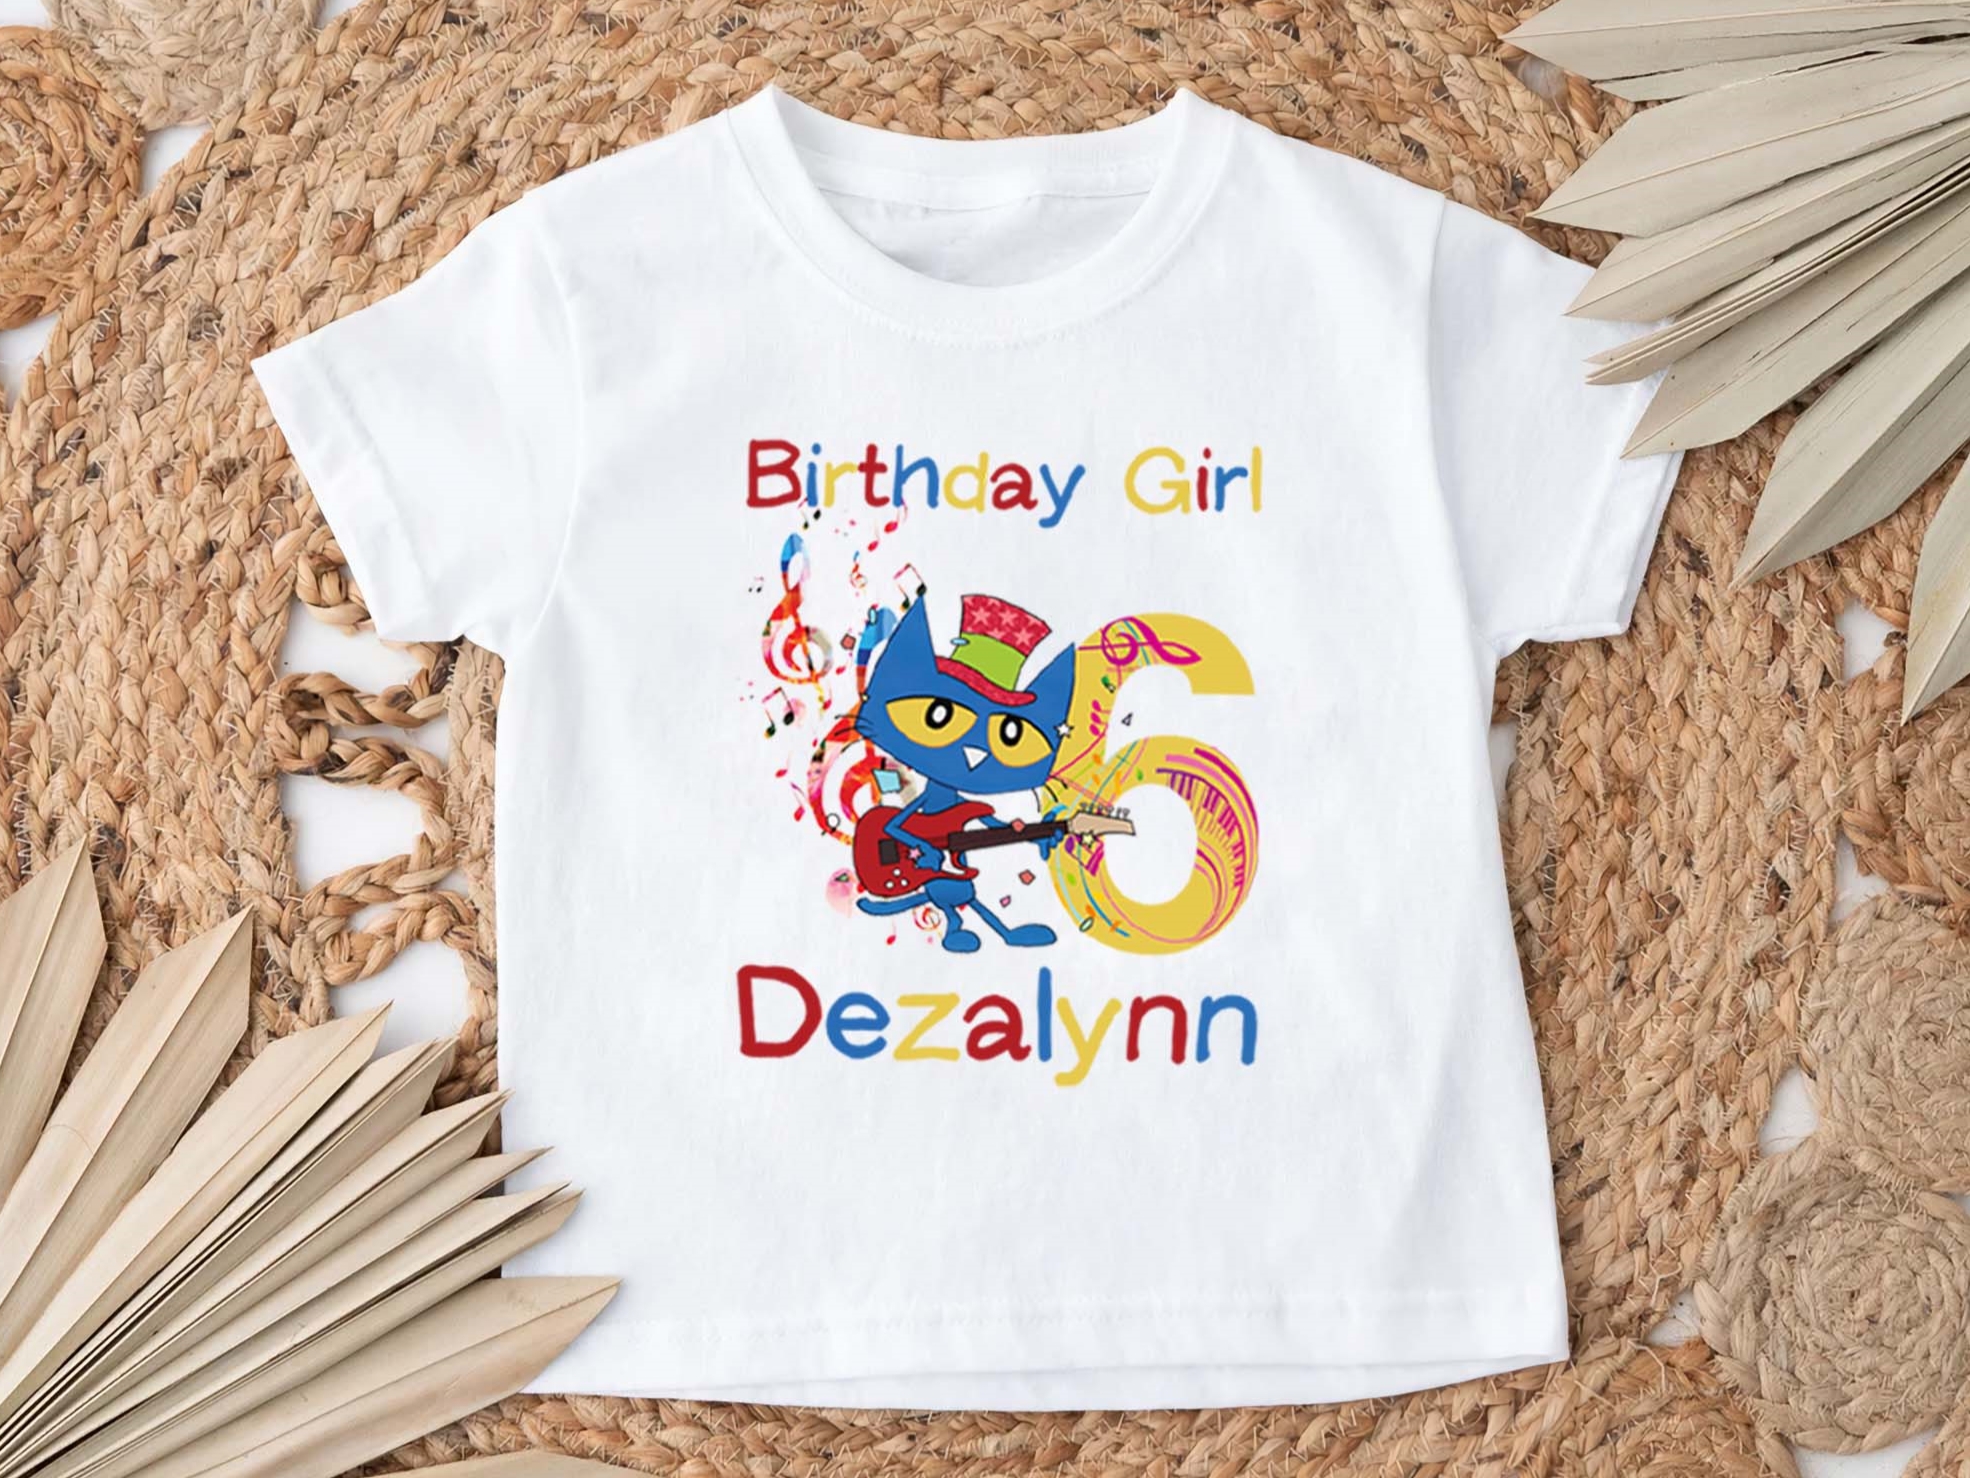 Personalized Pete The Cat Birthday Shirt, Pete The Blue Cat Inspired Shirt Groovy Birthday Shirt, Pete the Cat Birthday Party